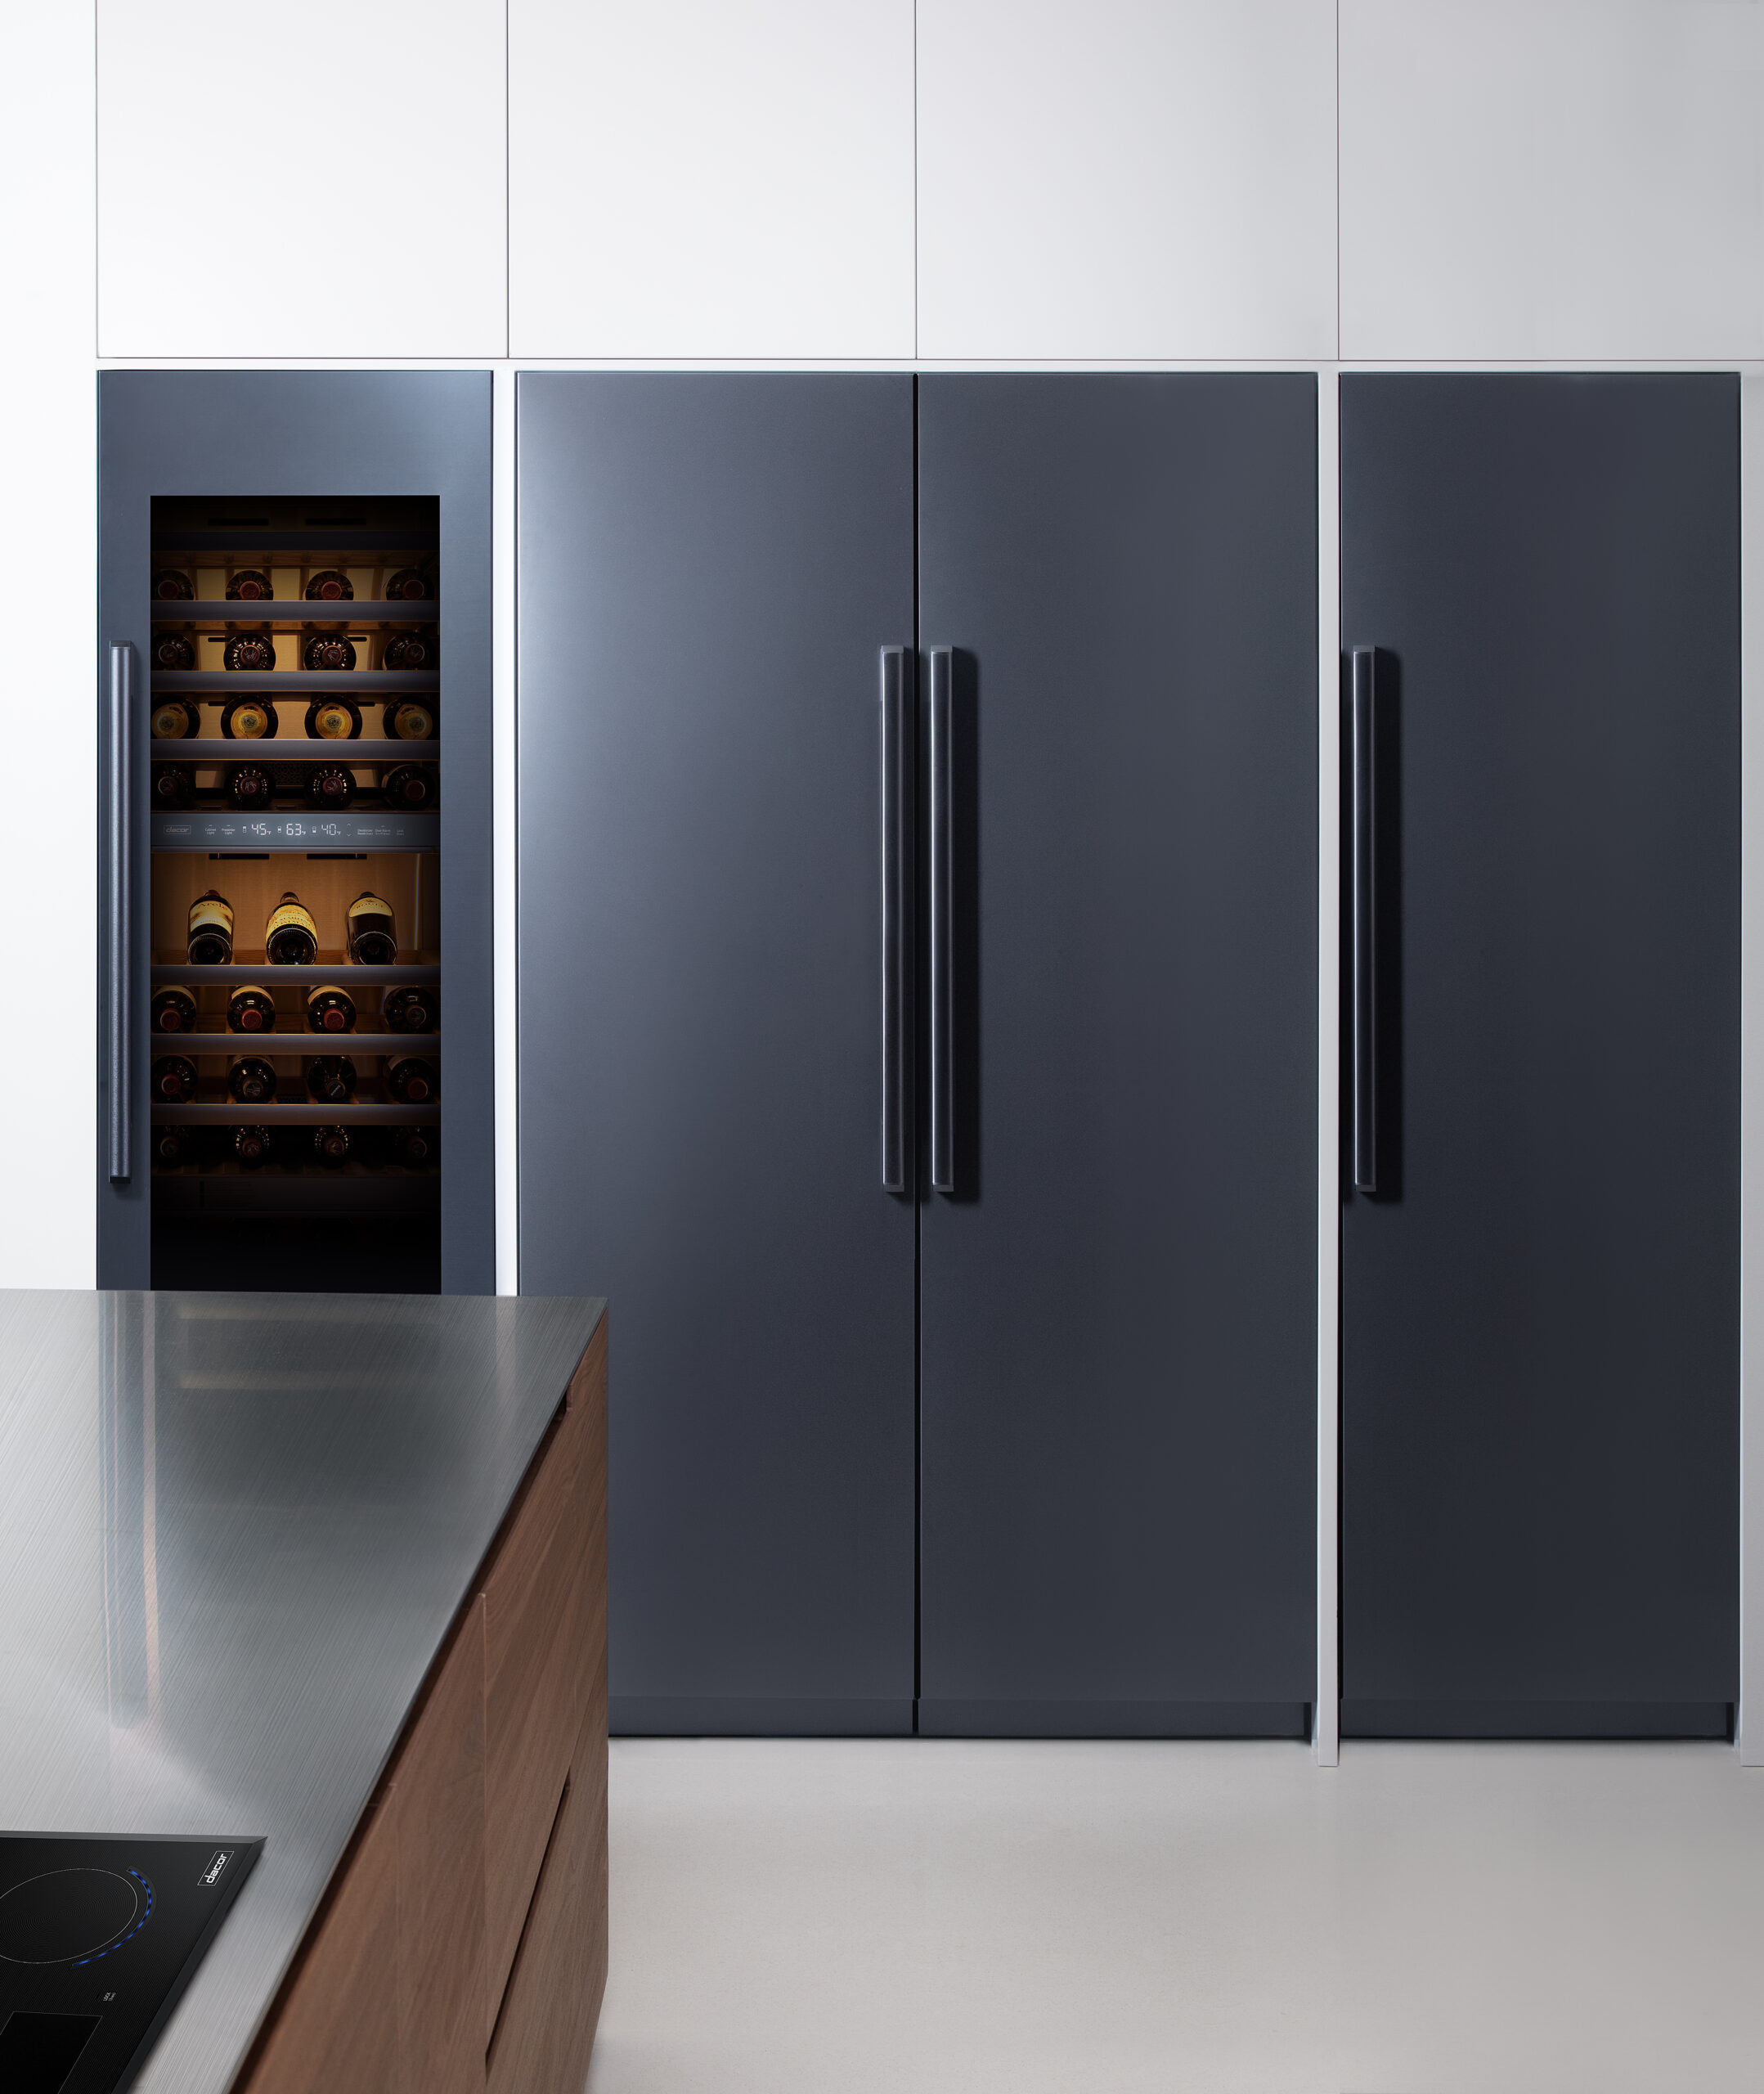 30-Inch Column Refrigerator By Dacor Popular Choice Winner, 2022 A+Product Awards, Building Systems, Smart Design & Technology 